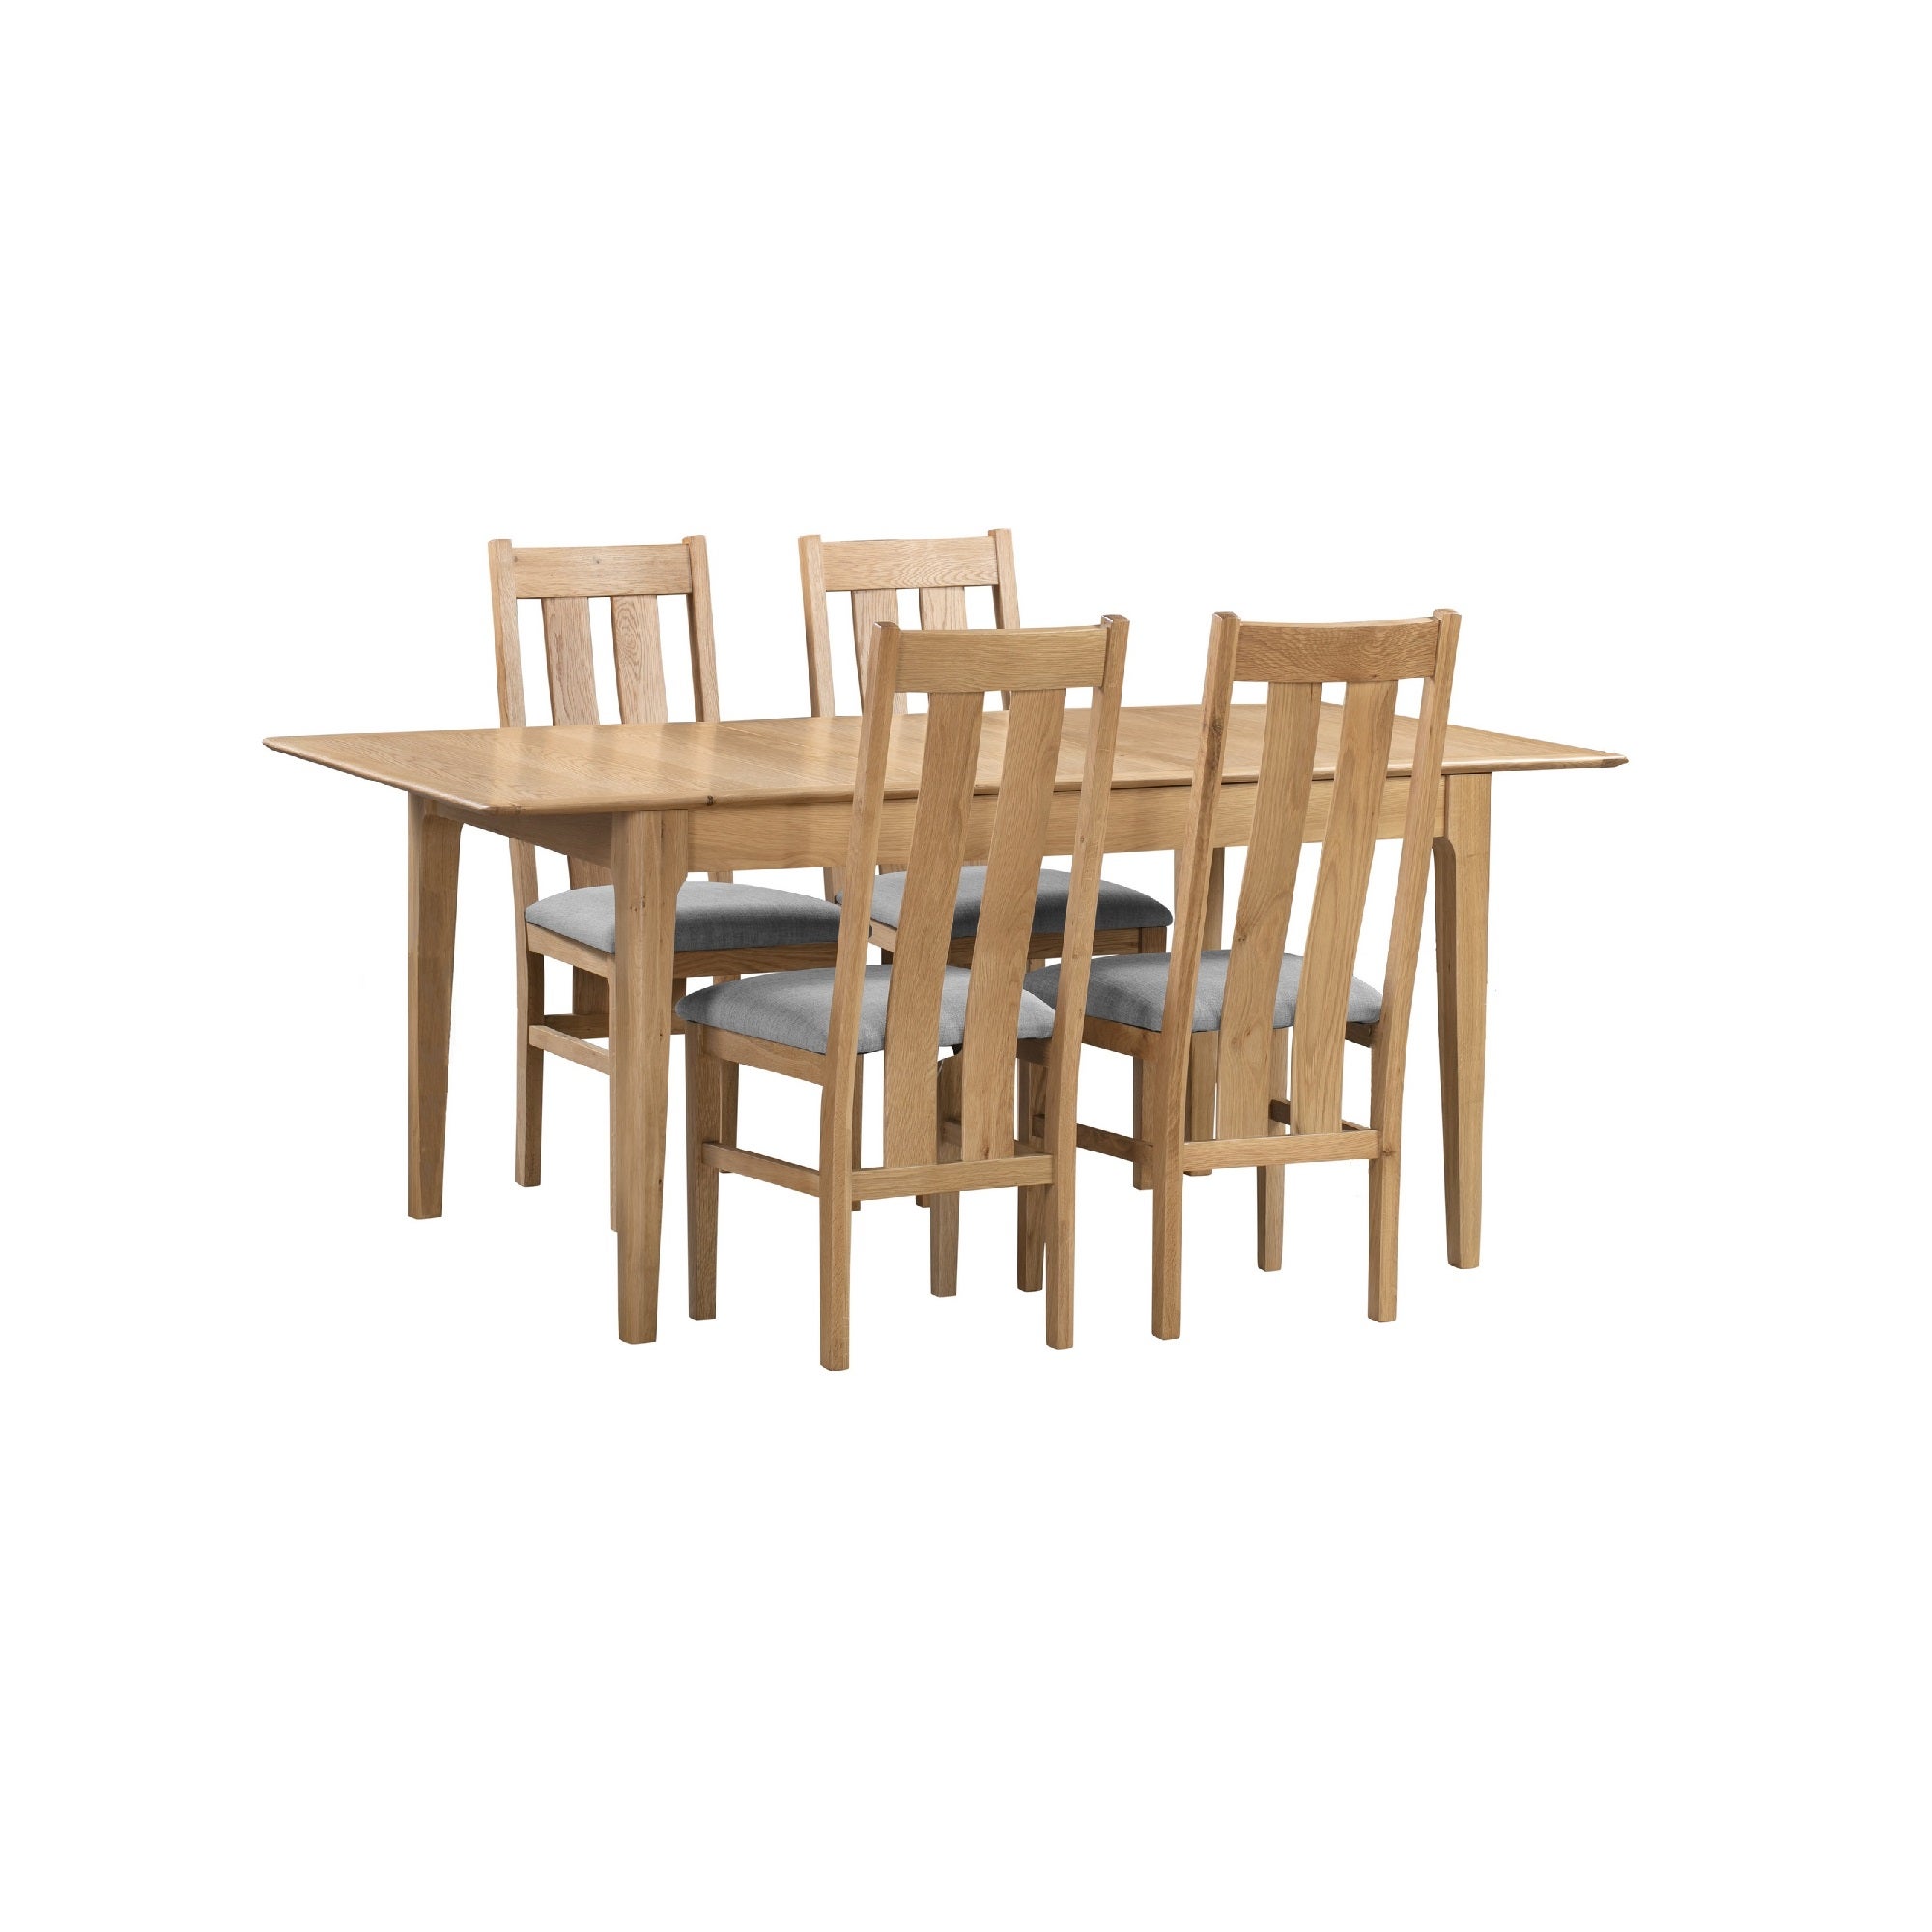 Cotswold Rectangular Extendable Dining Table With 4 Chairs Solid Oak Oak